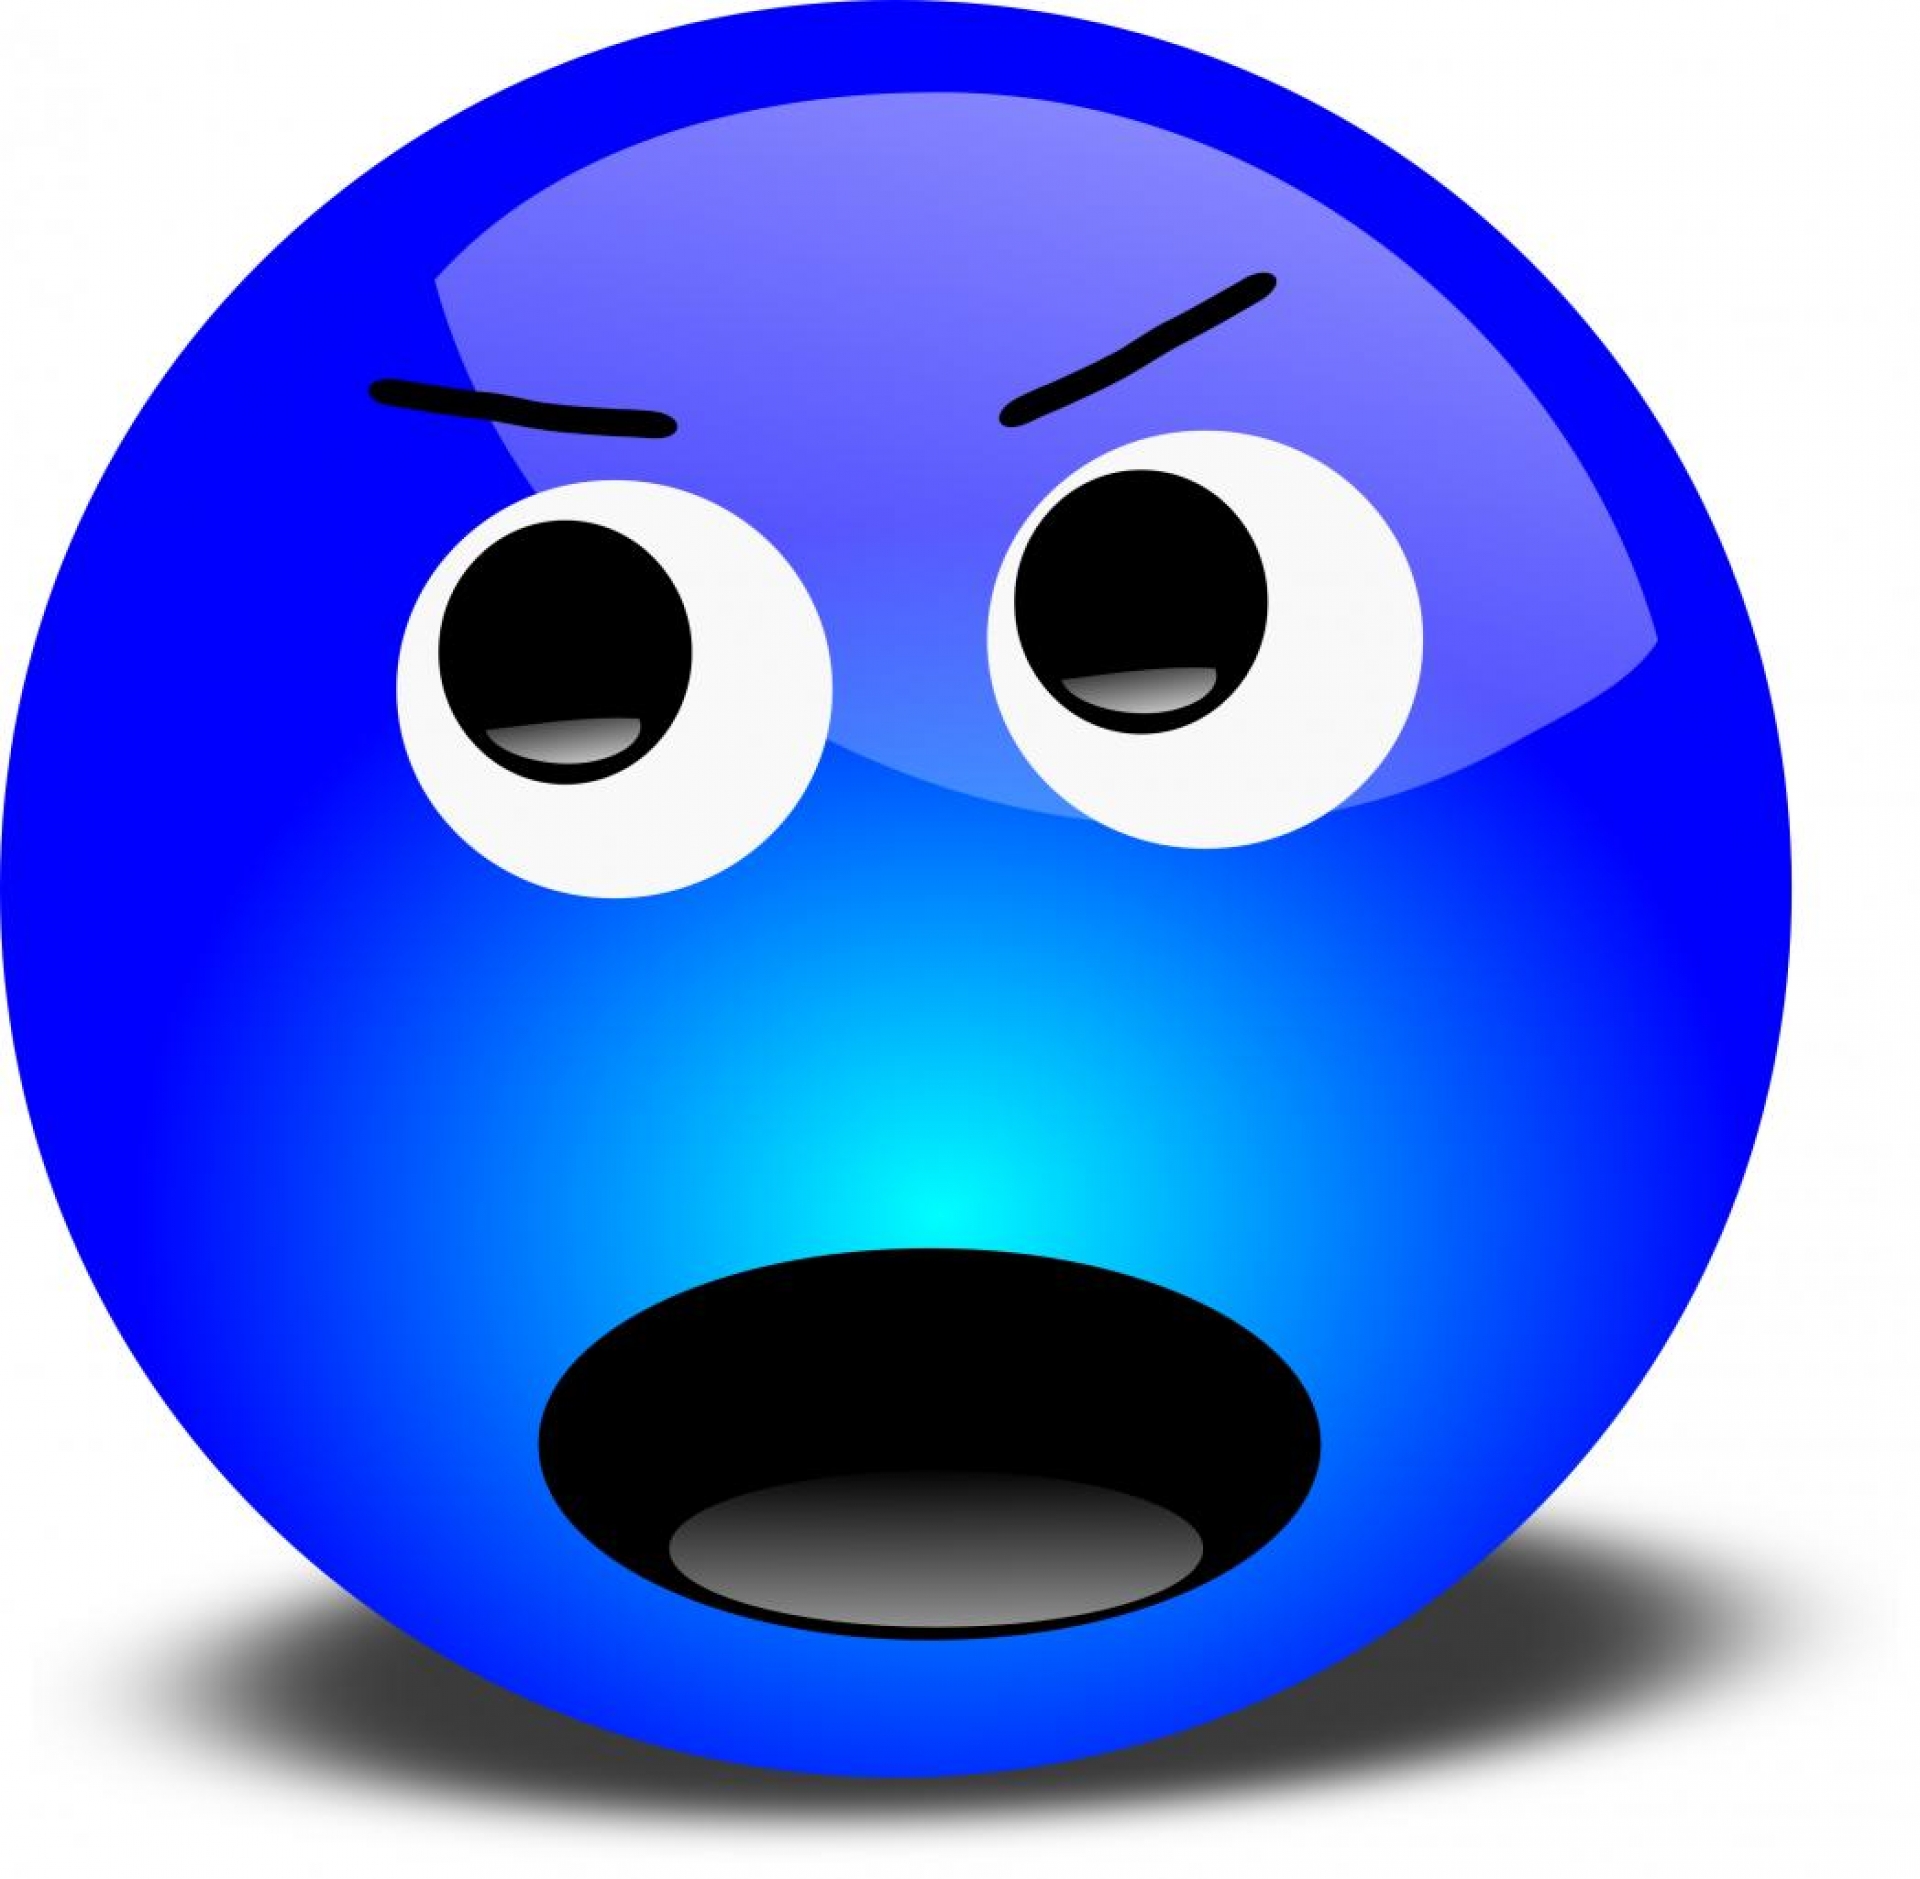 Cartoon Images Of Angry Faces - ClipArt Best